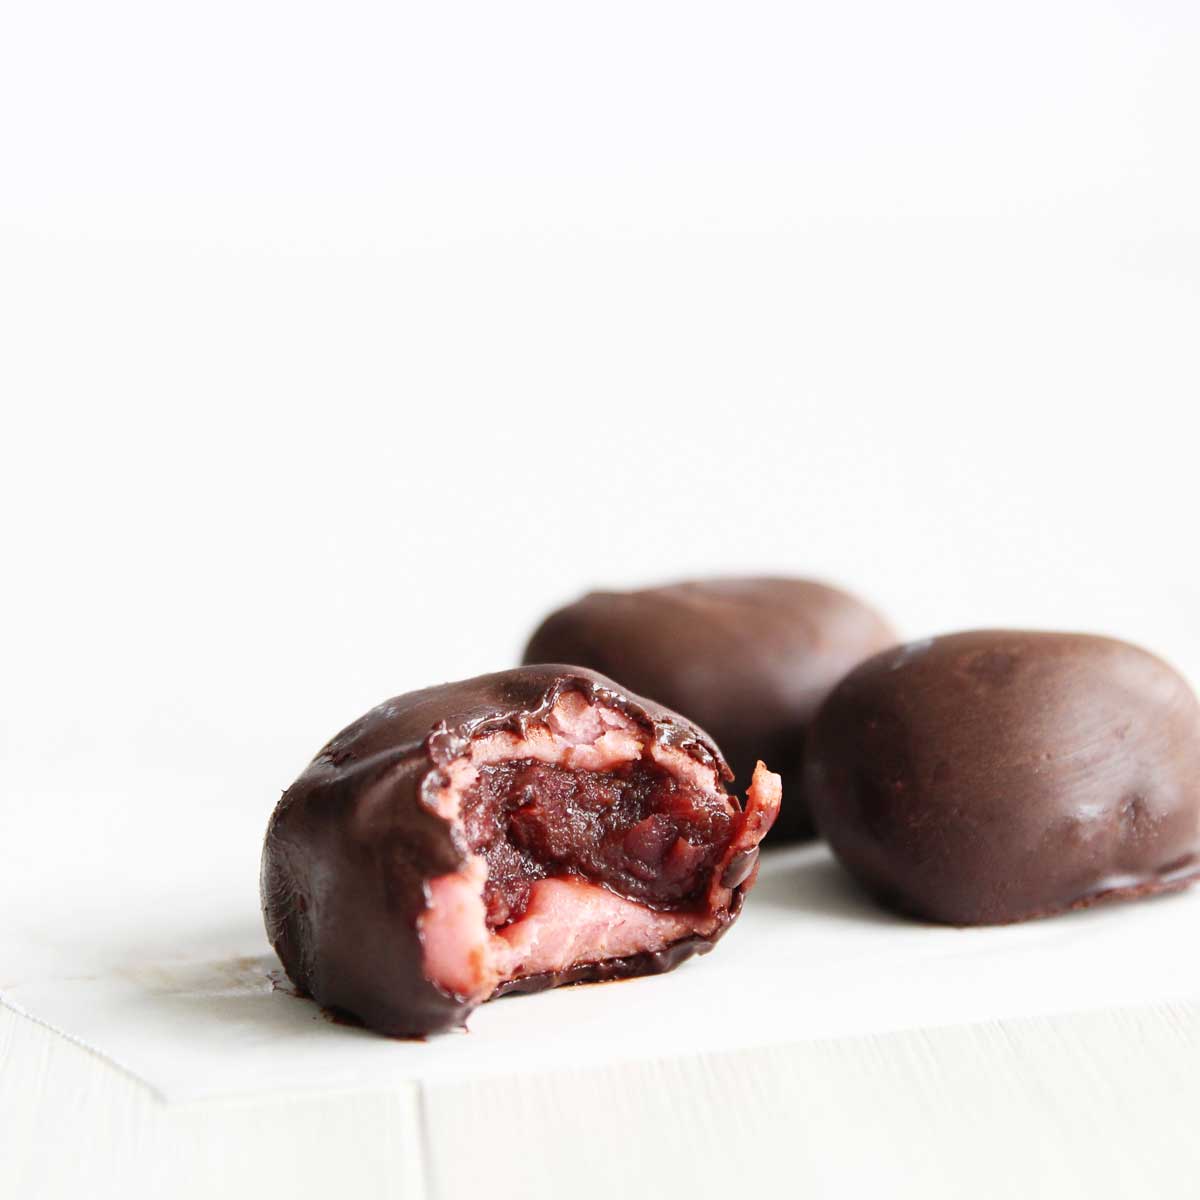 chocolate covered strawberry mochi with red bean paste filling
